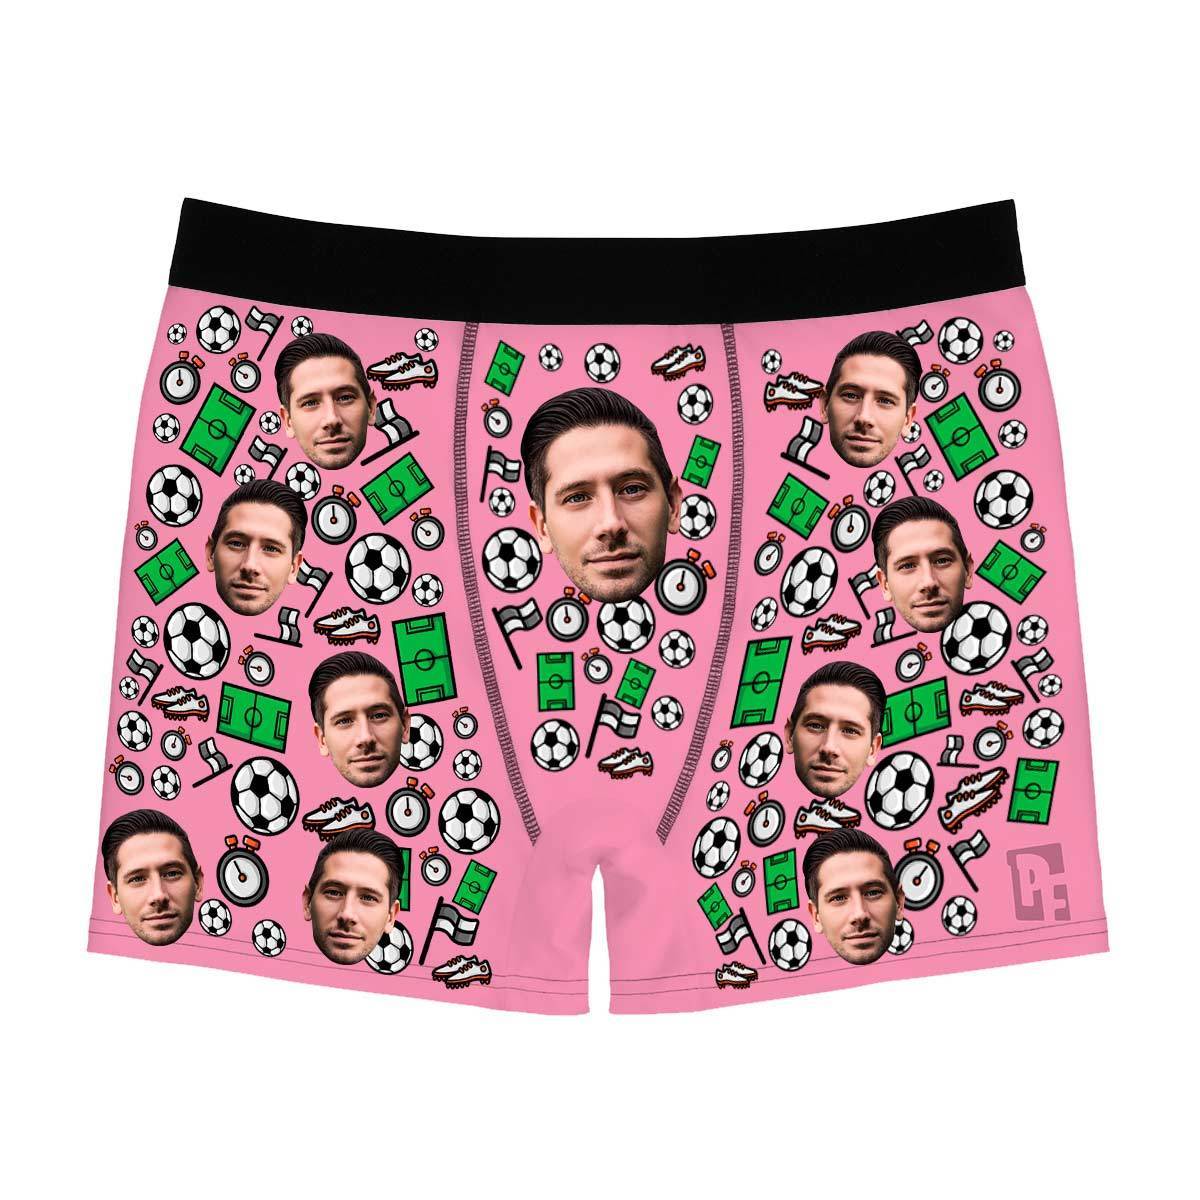 Pink Football men's boxer briefs personalized with photo printed on them